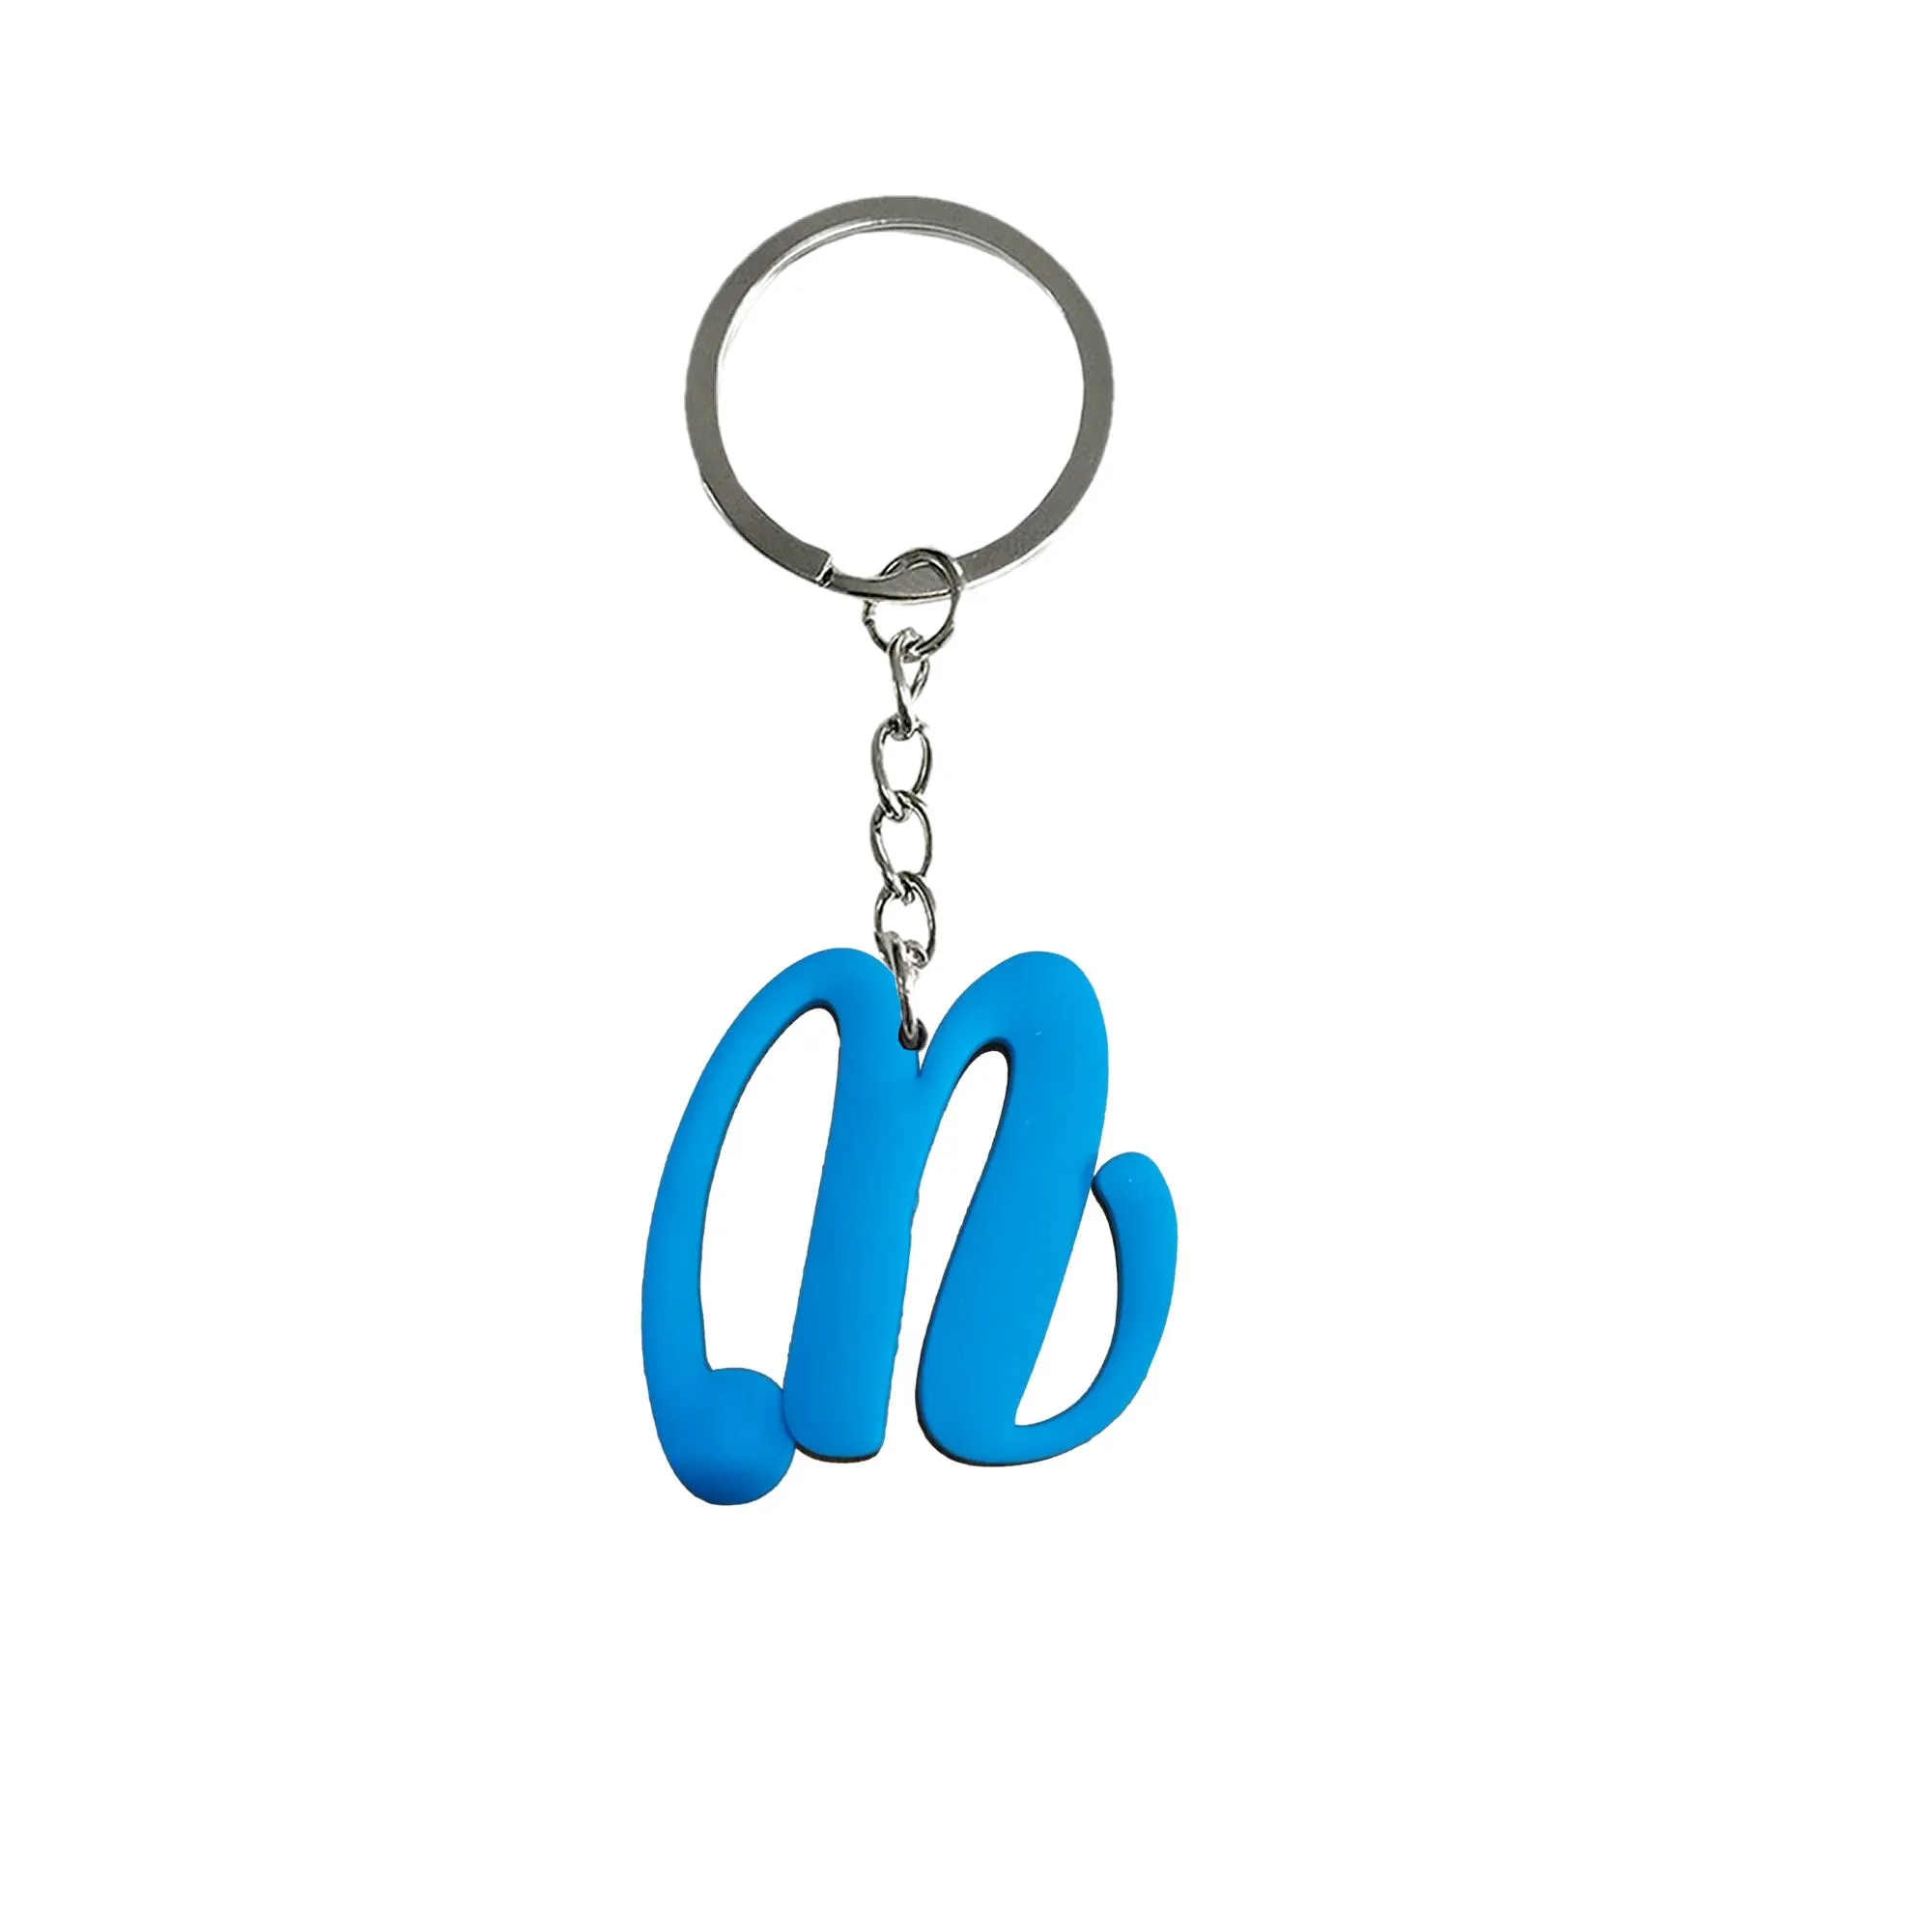 Charms Blue Large Letters Keychain Keychains For Backpack Kids Party Favors Keyring Suitable Schoolbag Women Key Ring Girls Pendant Ac Otq0N